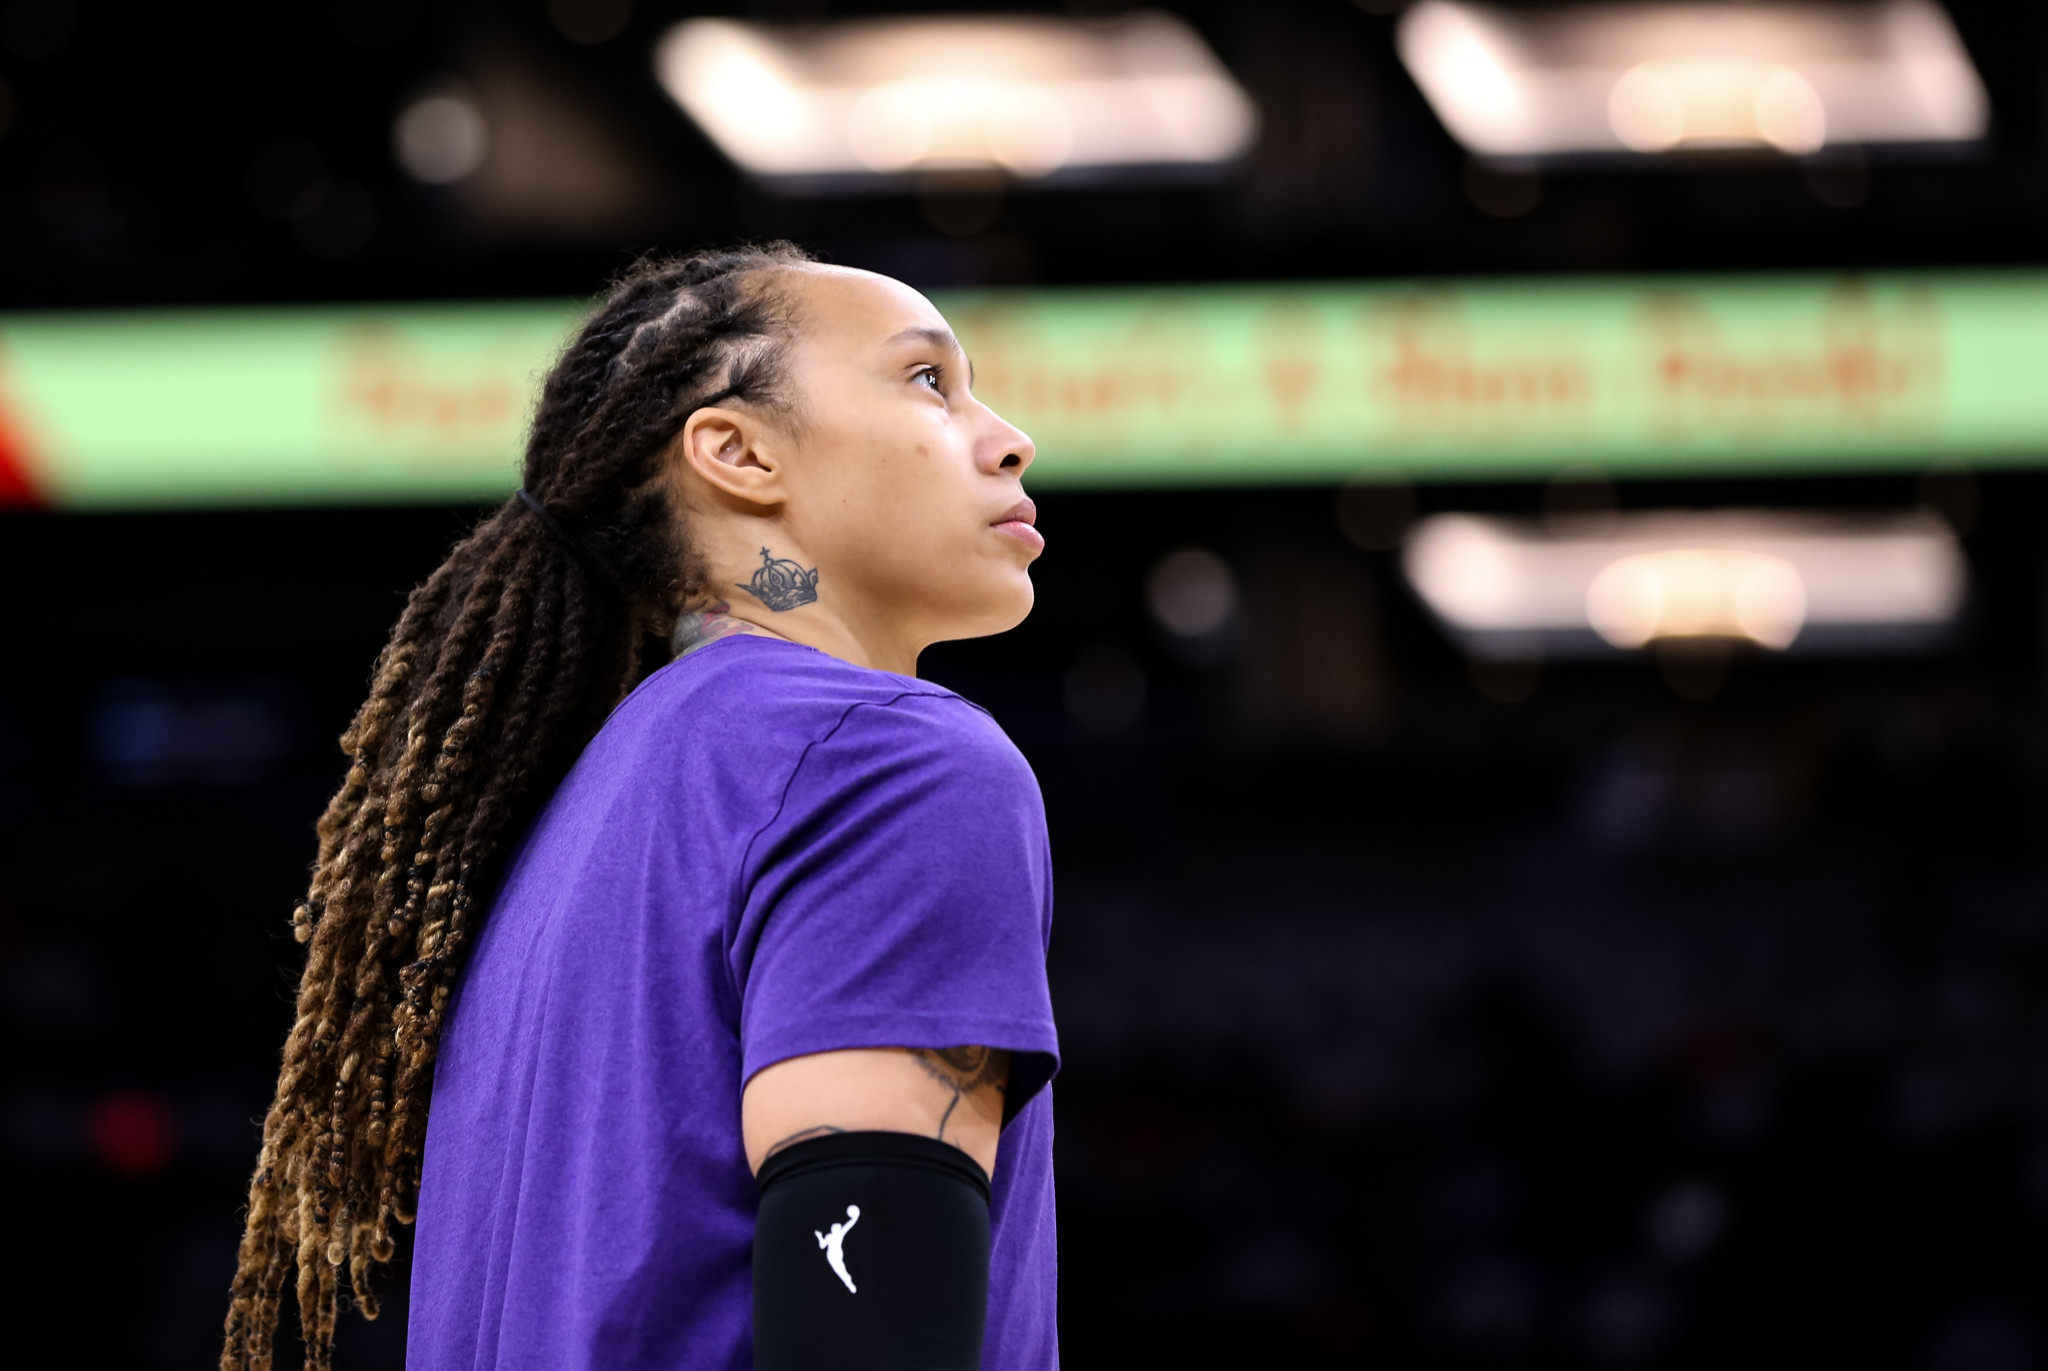 Phoenix Mercury coach says team concerned for Griner safety as detention in Russia continues